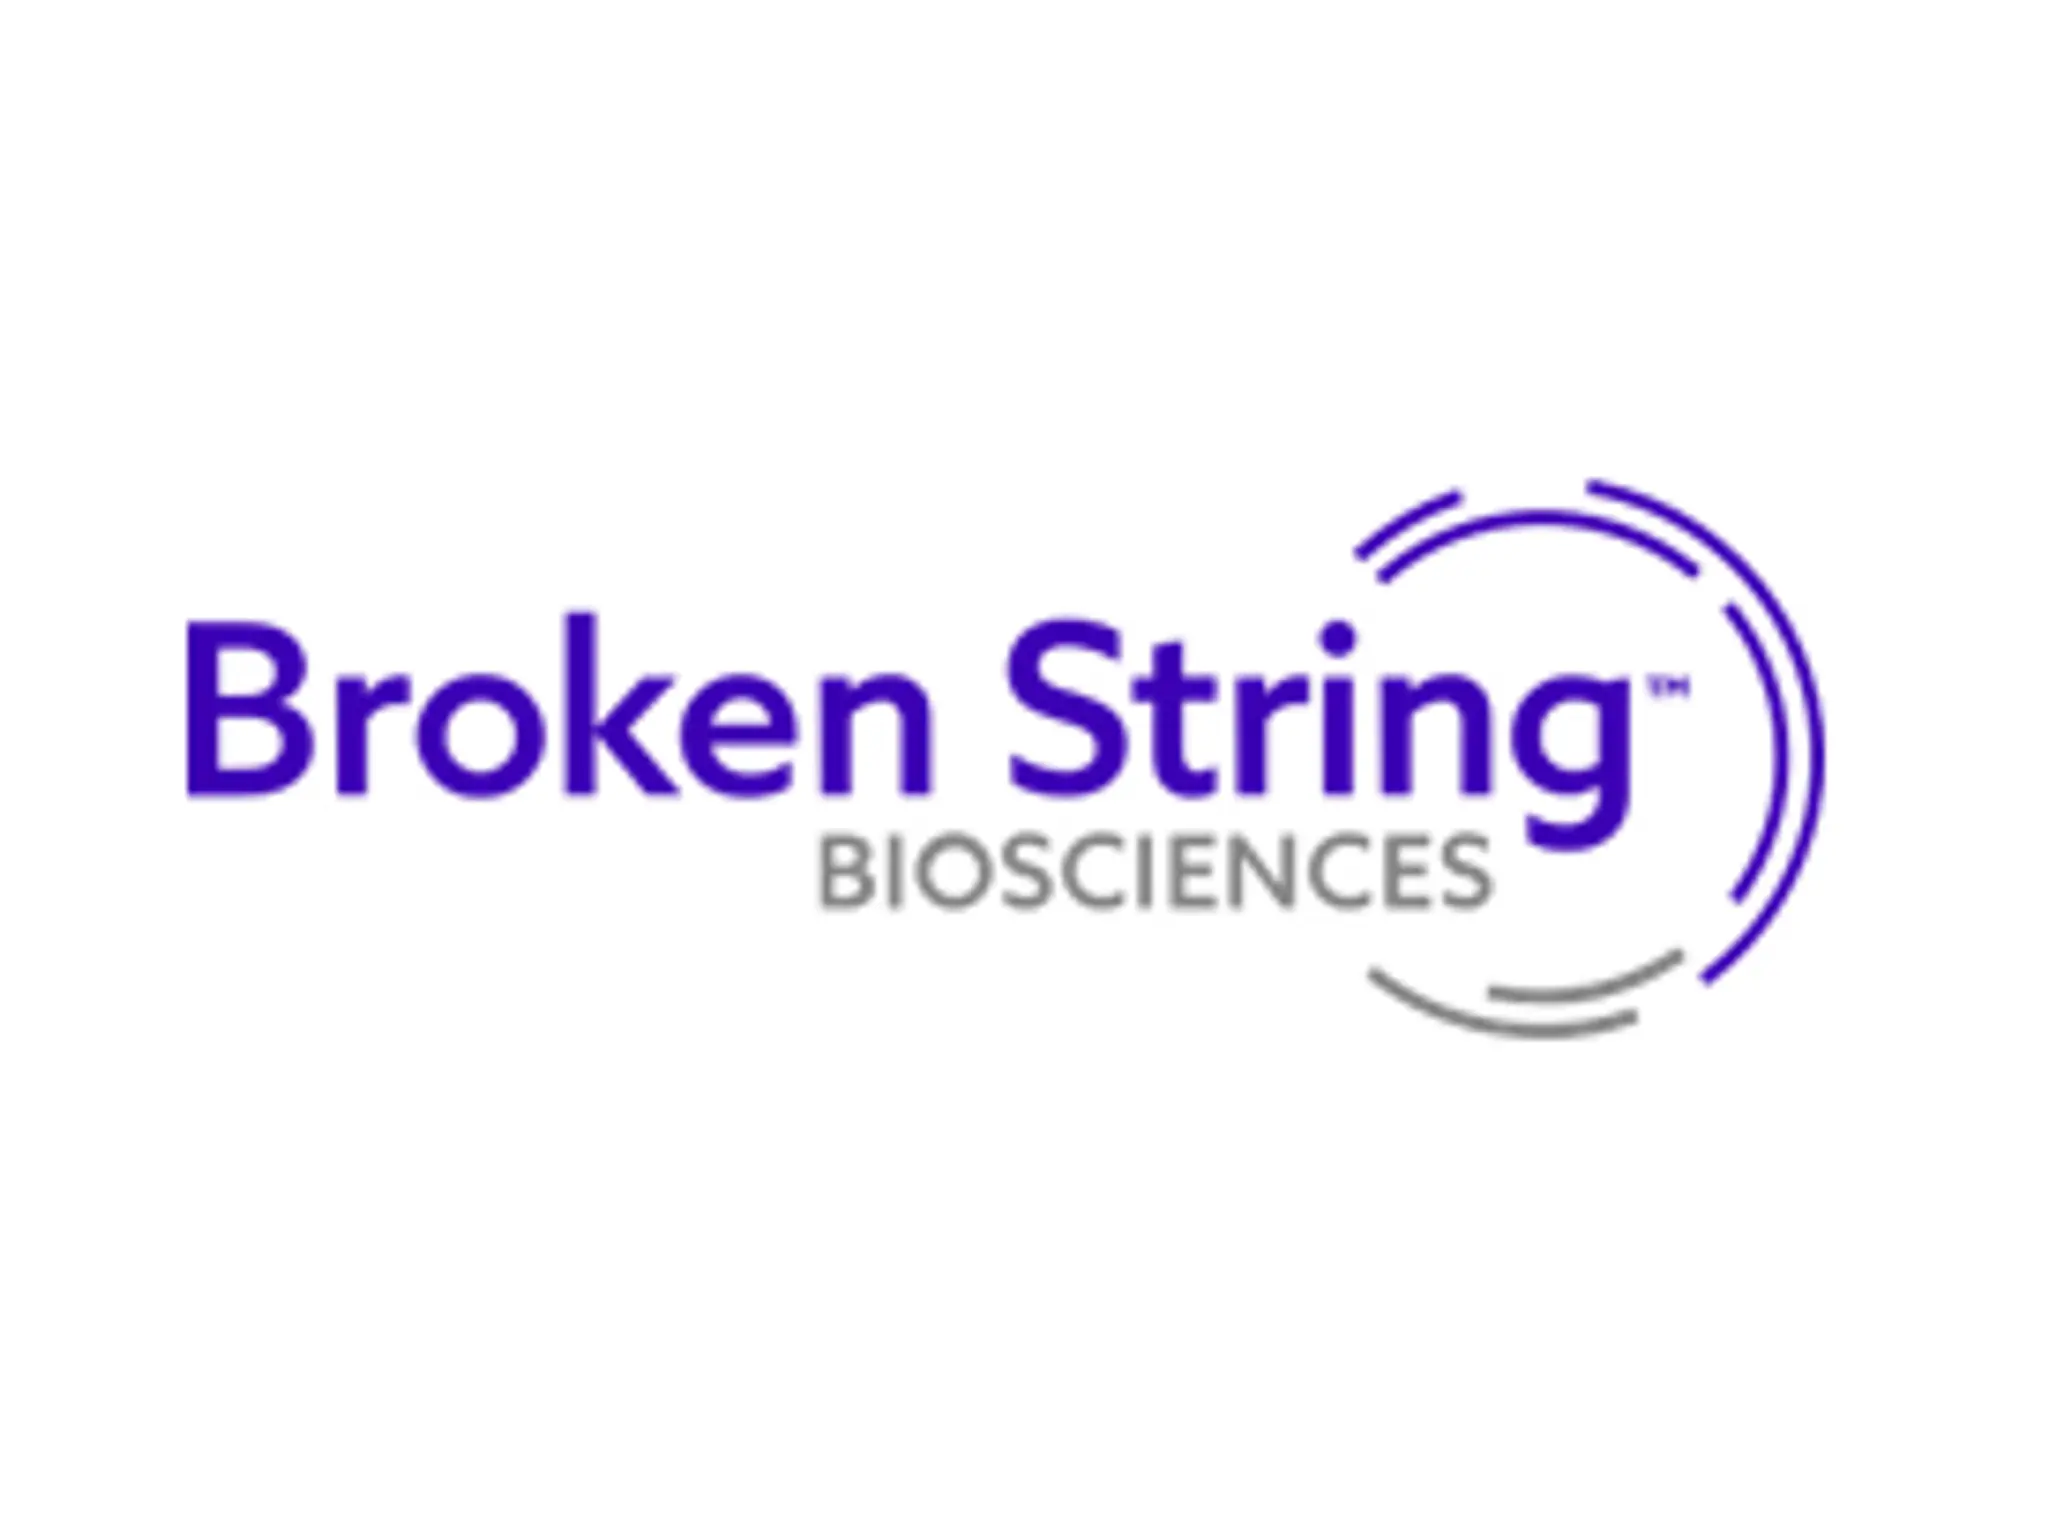 Broken String Biosciences appoints Gavin Burns as Vice President of Quality and Operations 